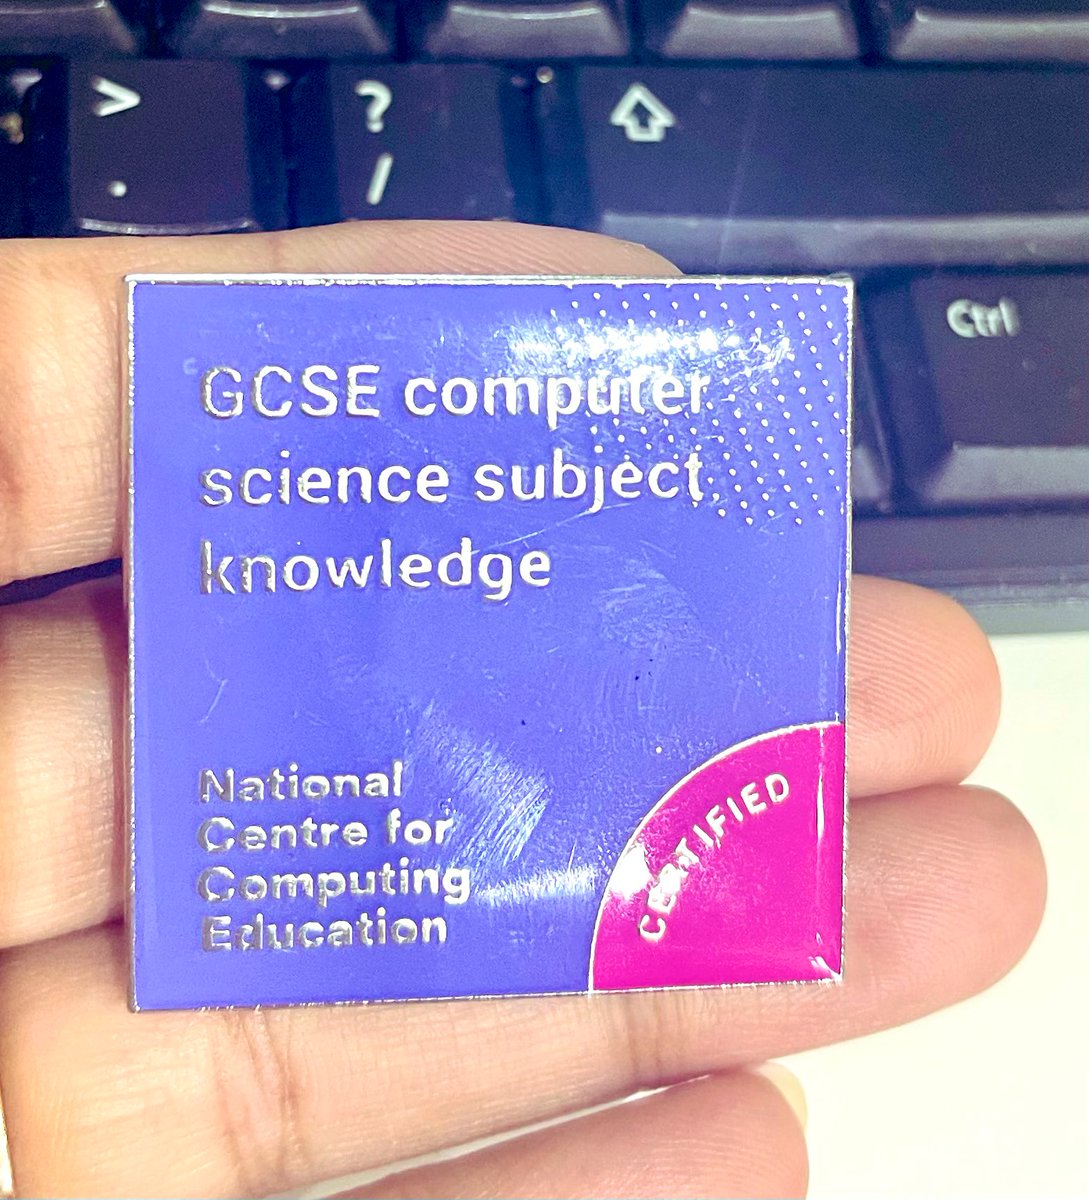 Look 👀 at the little treasure I just found, presented to me @google HQ in London in 2019! 

Does anyone else still have their badge? Share your 📸 please! 

@WeAreComputing @CompHubKent #NCCE #CSaccelerator #Computing #classof2019 #computerscience